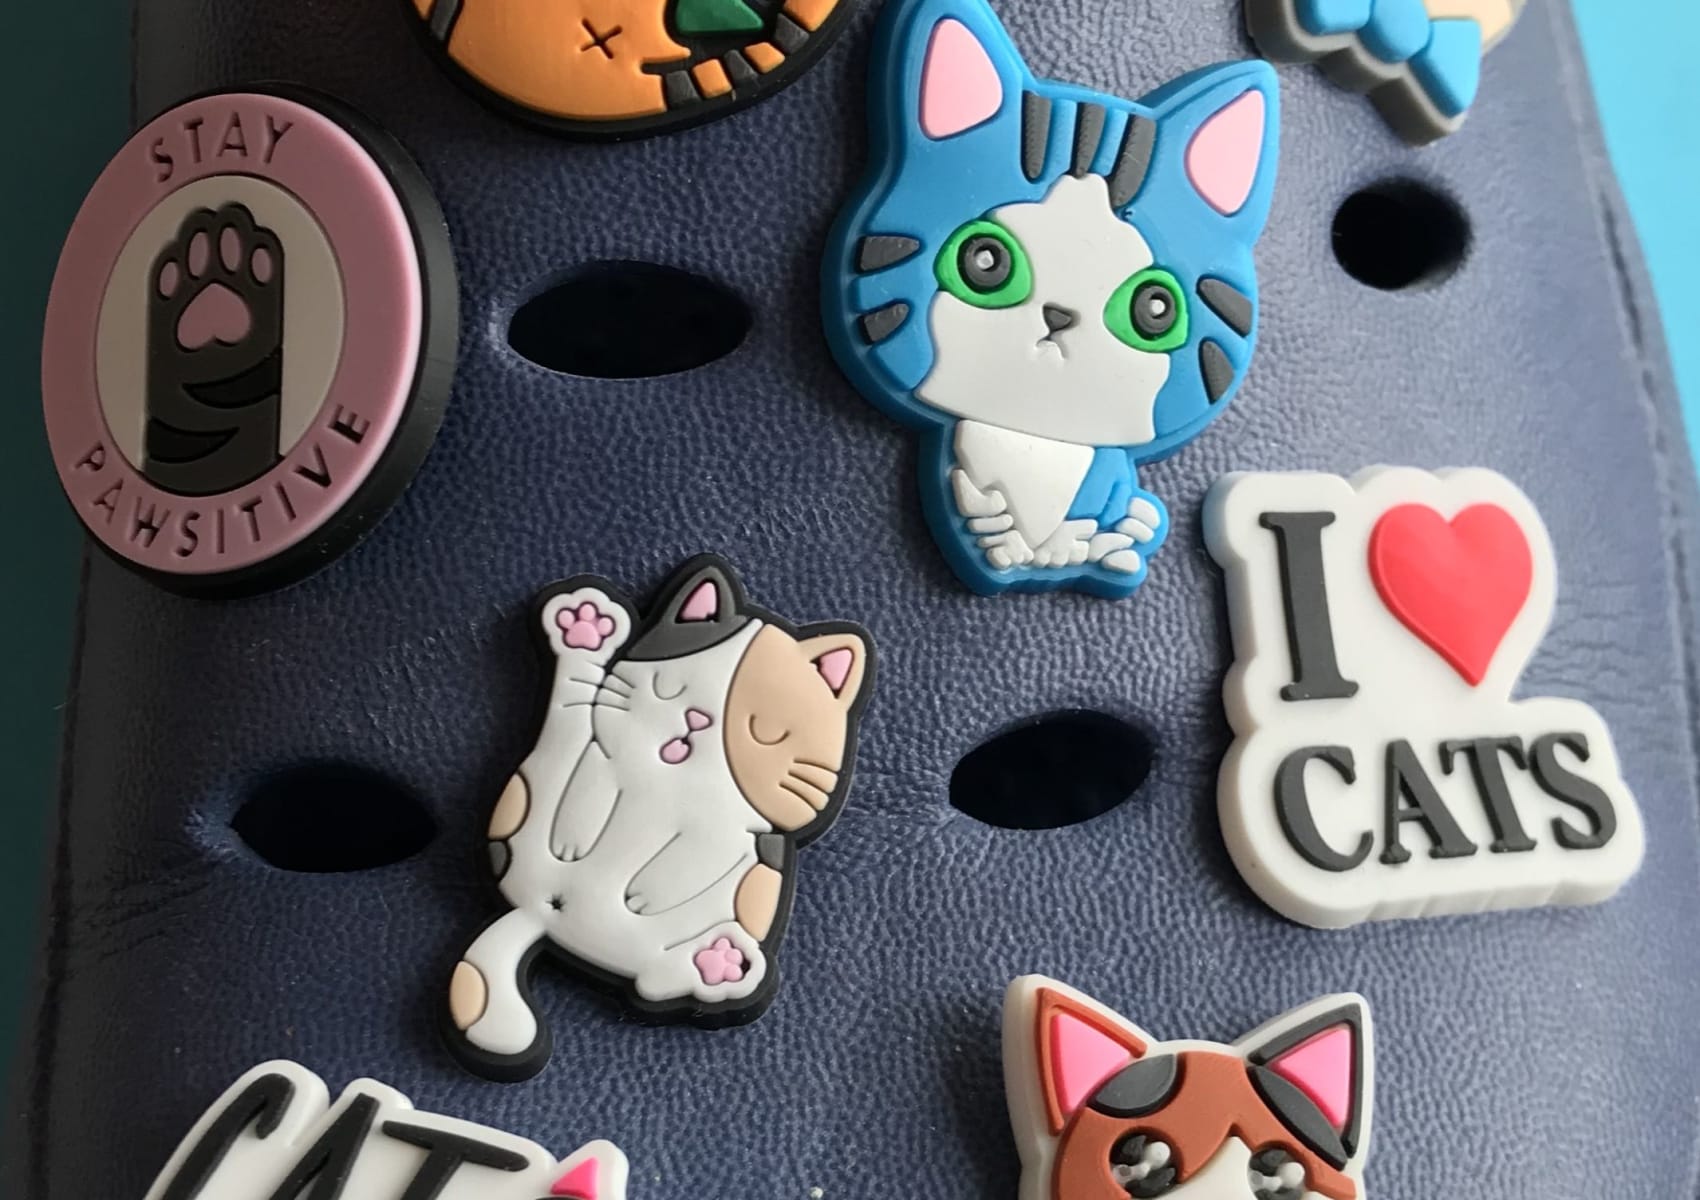 Cat charms for crocs on sale at Yorkshire Cat Rescue